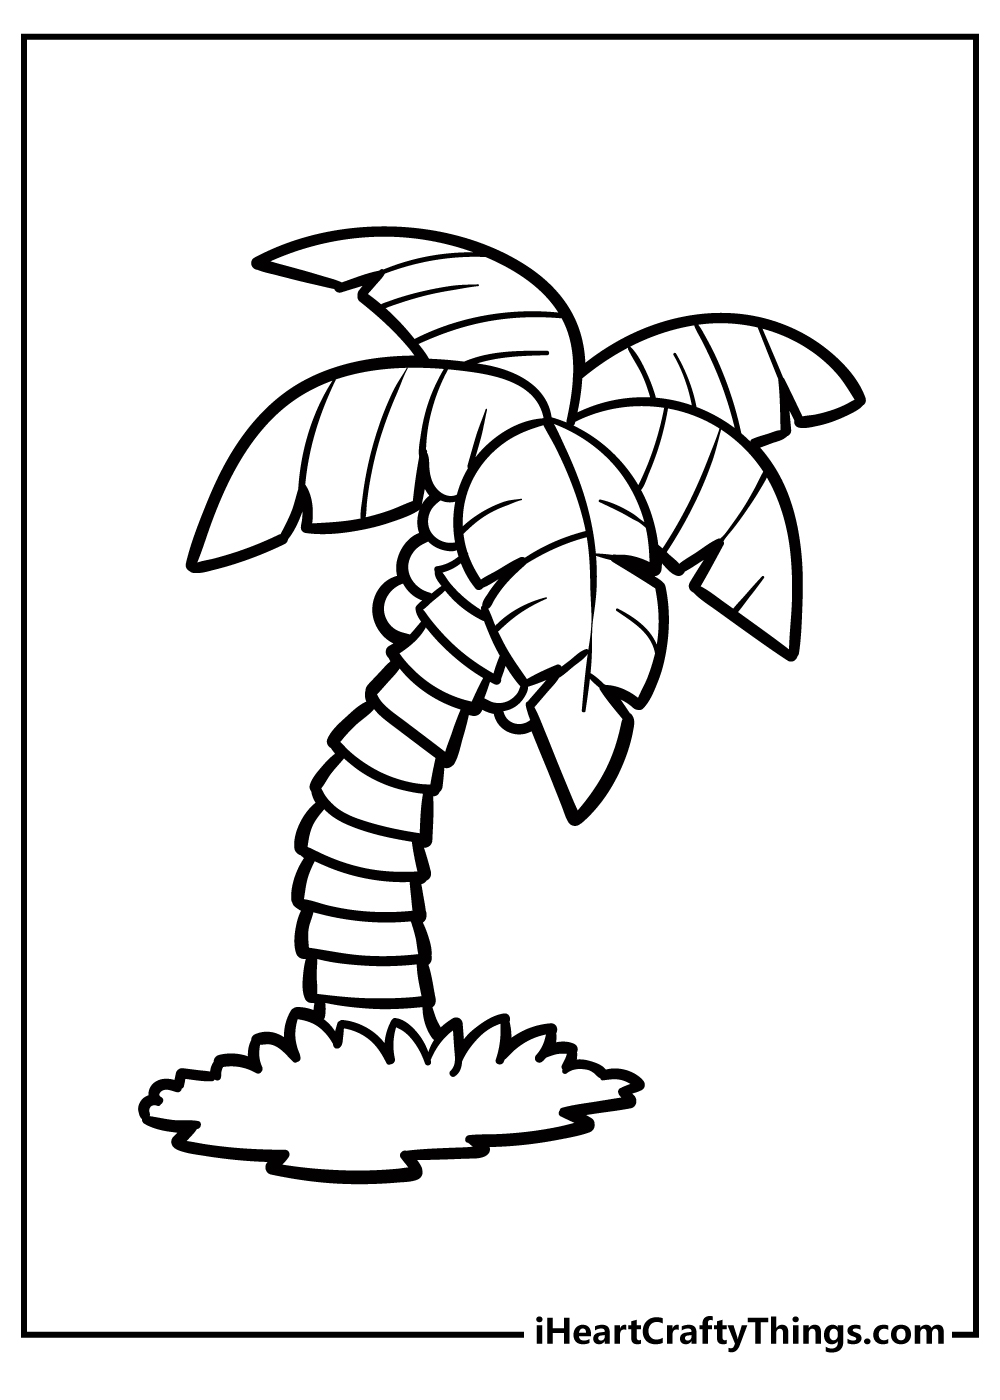 Palm Tree Coloring Pages free pdf download